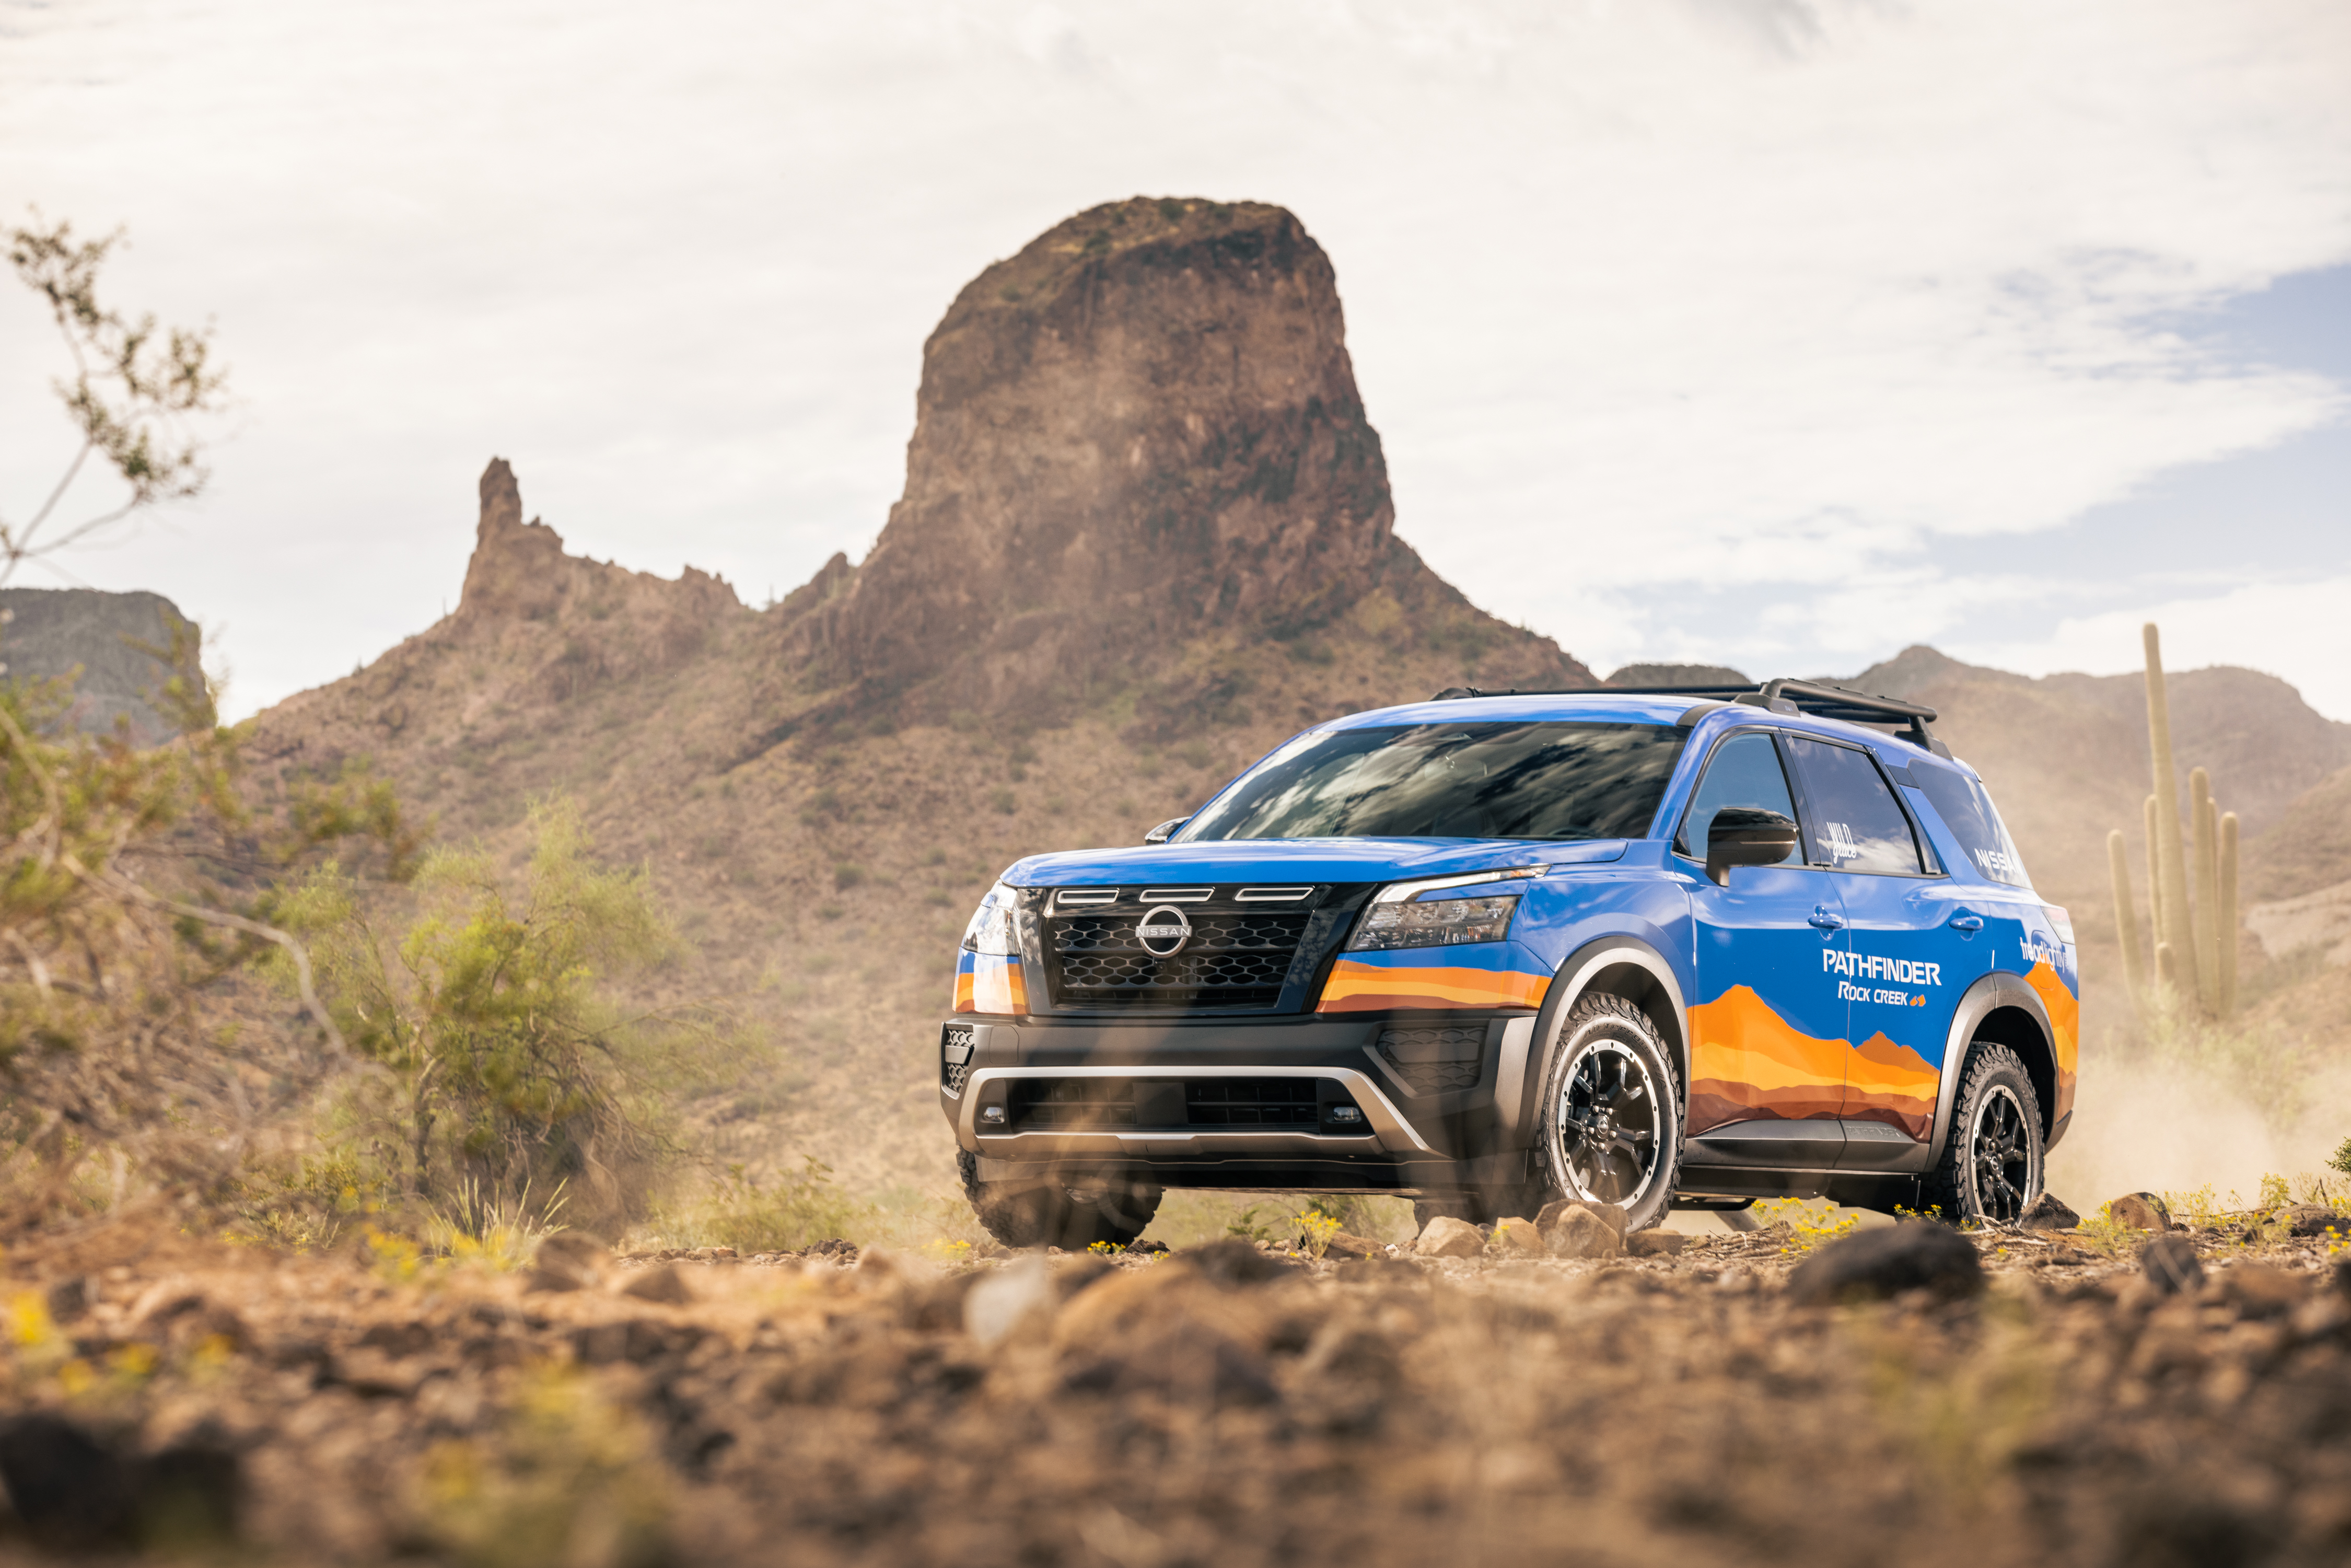 Nissan And Team Wild Grace Return To 2022 Rebelle Rally With Rugged Pathfinder Rock Creek Business Wire